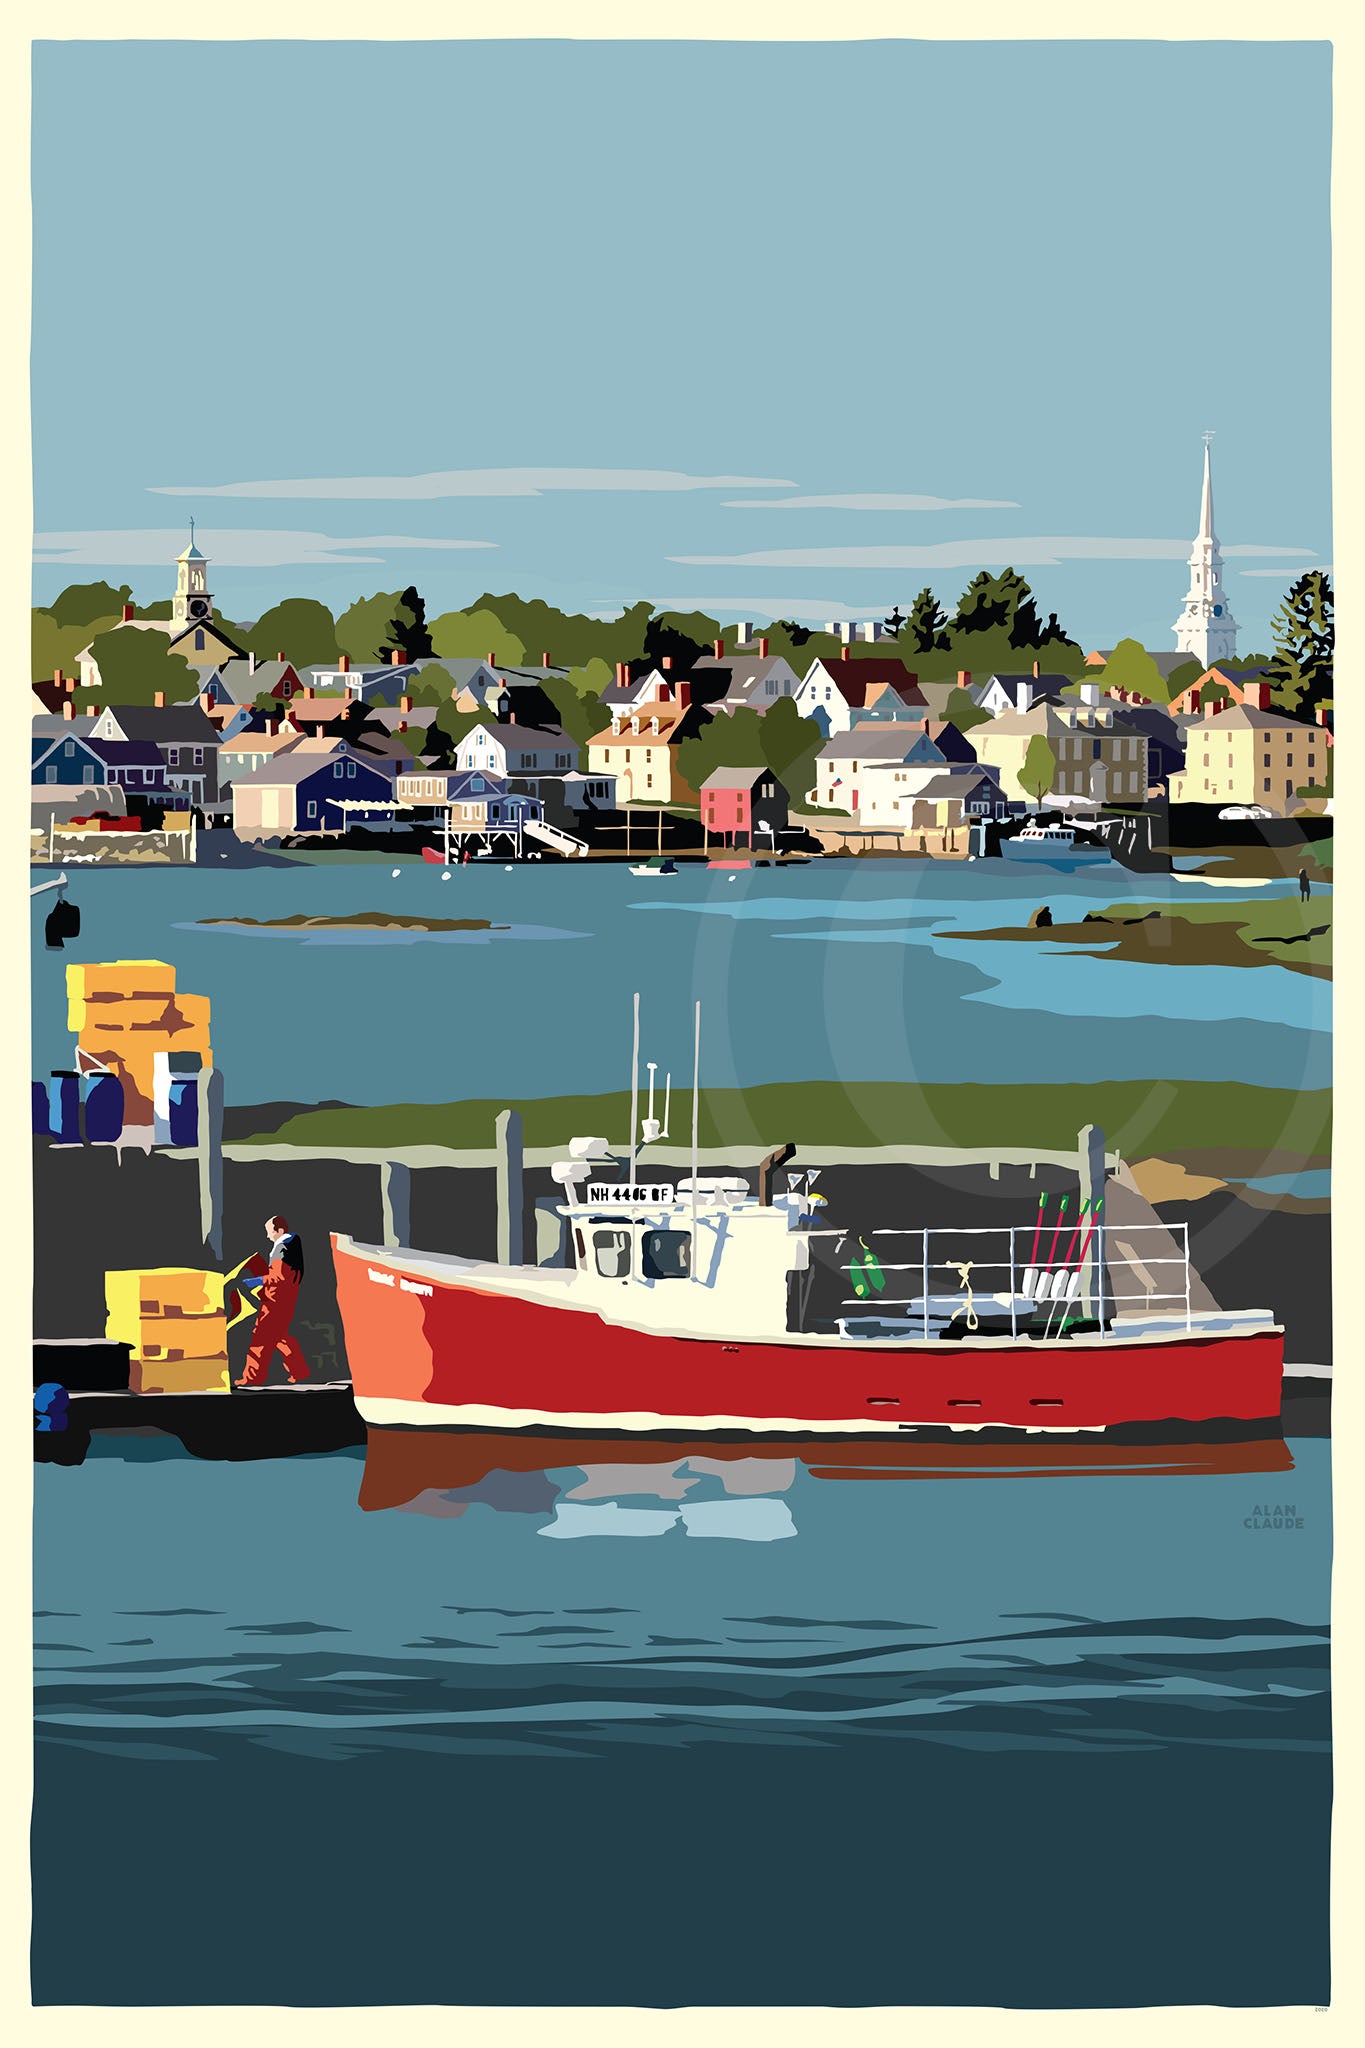 Red Lobster Boat Art Print 36" x 53" Wall Poster By Alan Claude - New Hampshire